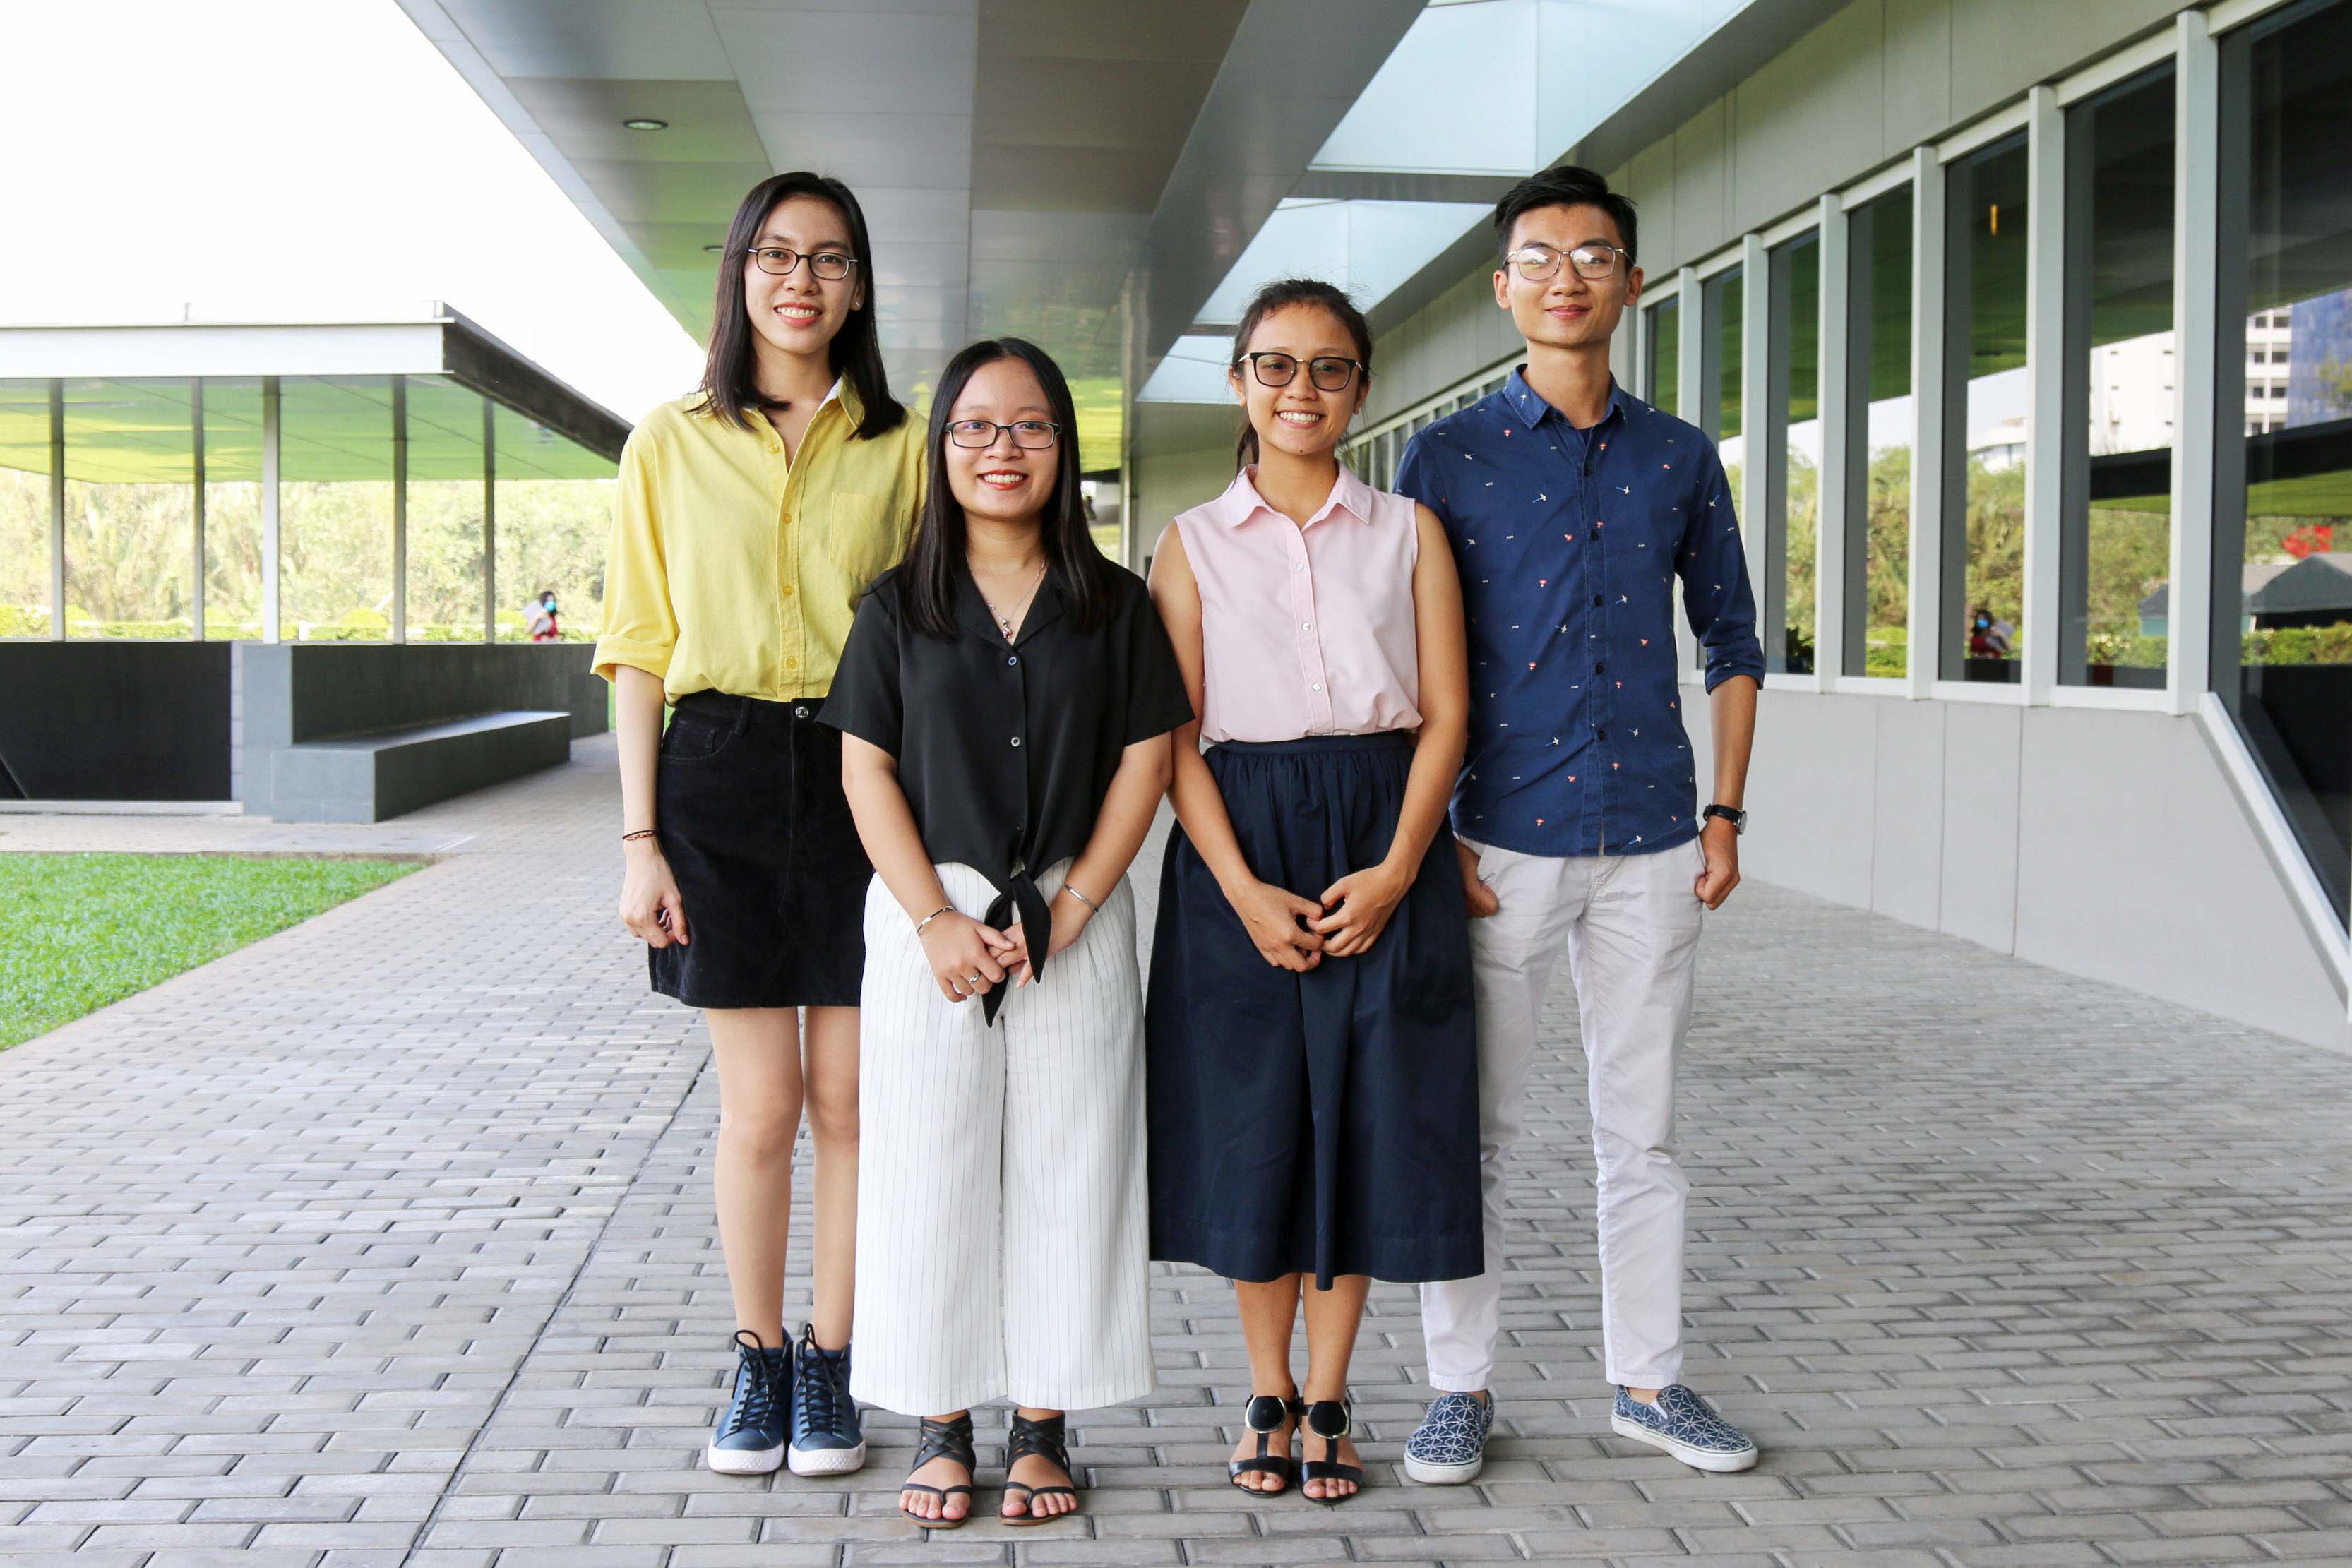 (From left to right) The Food Warrior team includes first- and second-year students Nguyen Yen Han, Le Tran Anh Thu, Do Hoang Thao Vi, and Hoang Van Phuc Trieu.